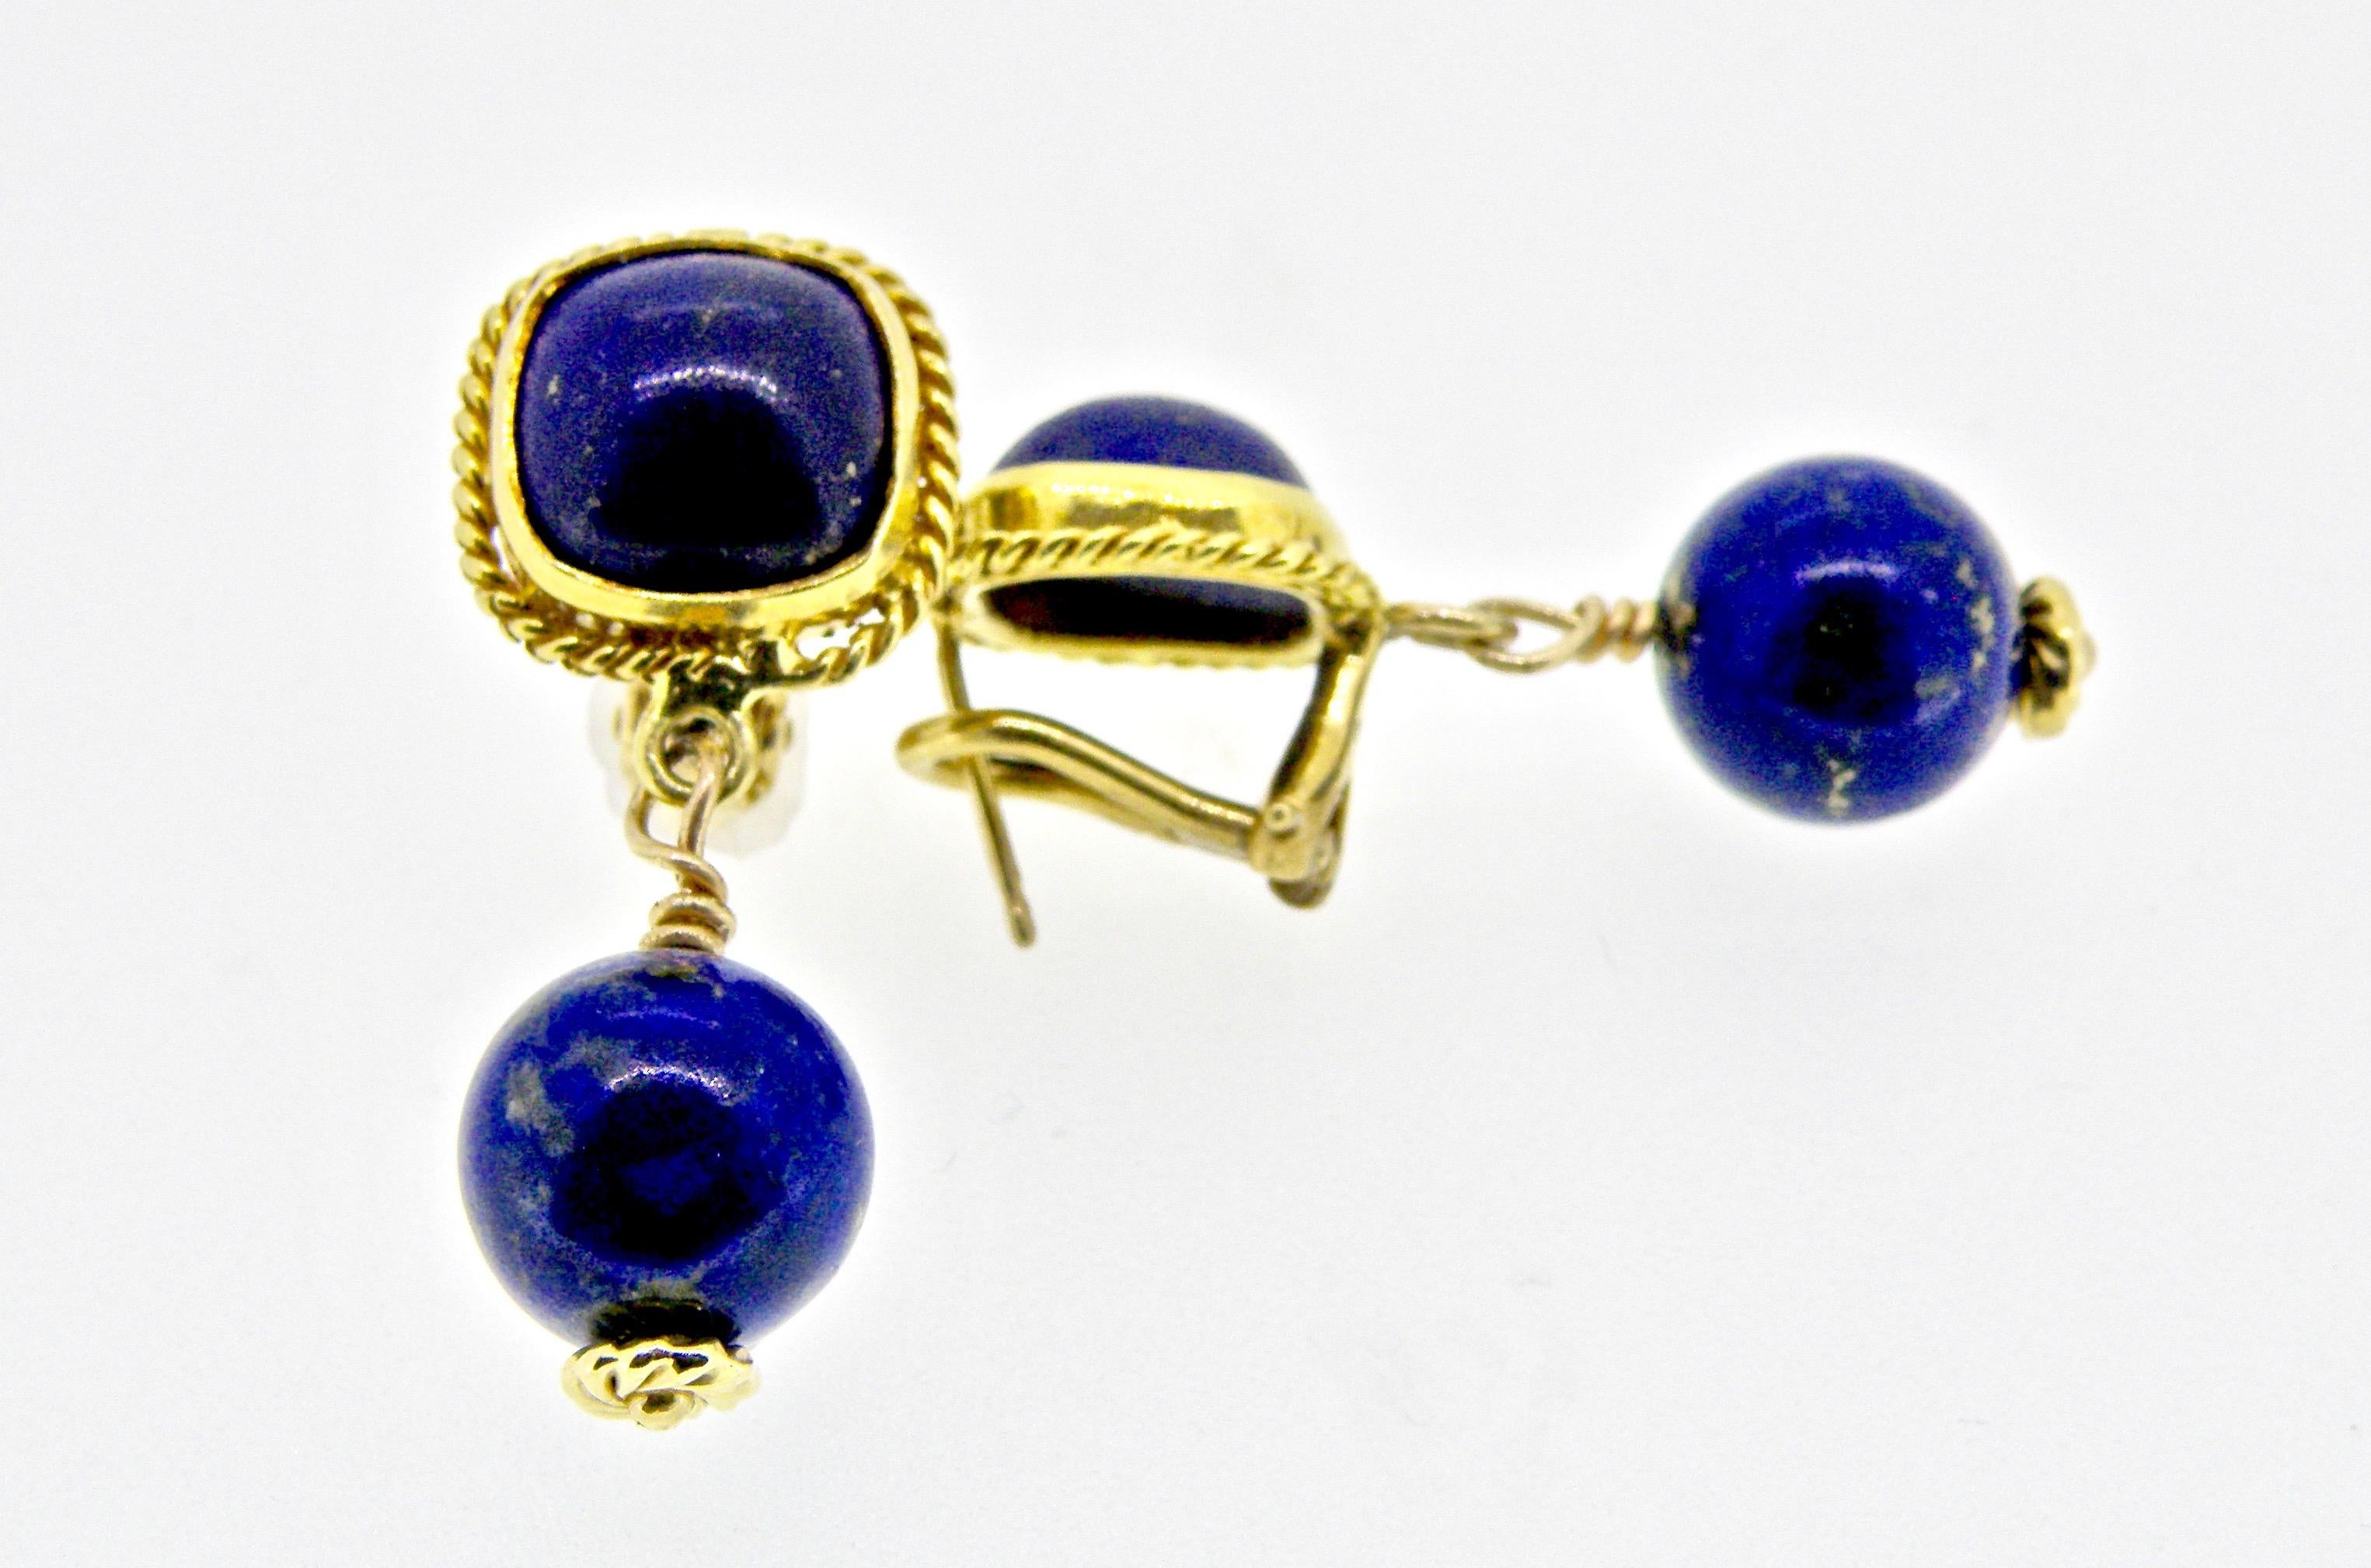 18K Lapis Lazuli special cushion cut with 10mm Lapis drops earring  are clip and posts